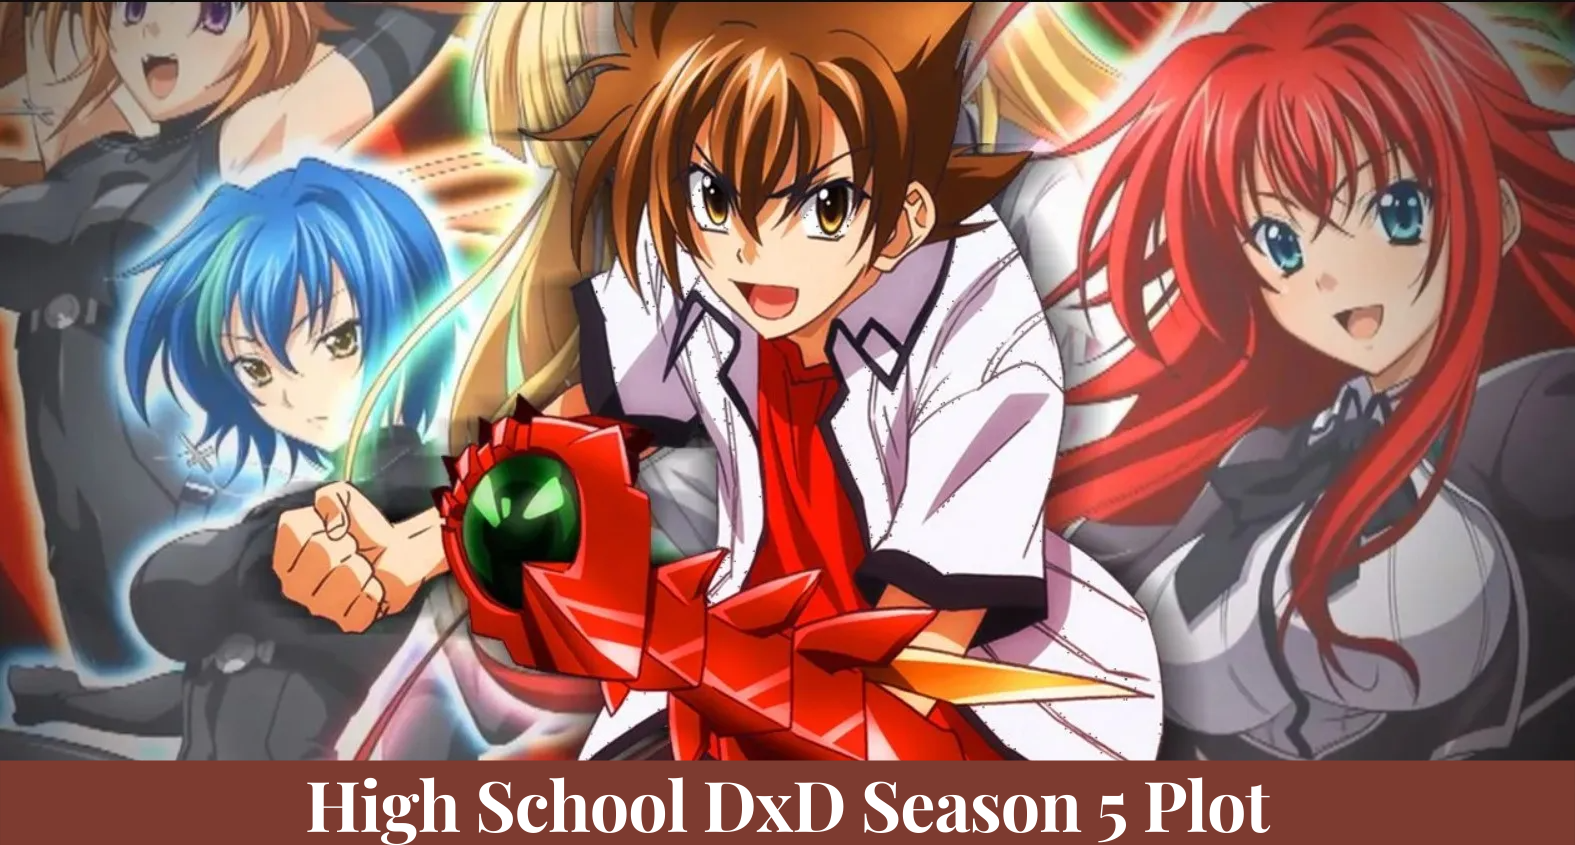 High School DxD Season 5 Plot: How is the story going to unfold?